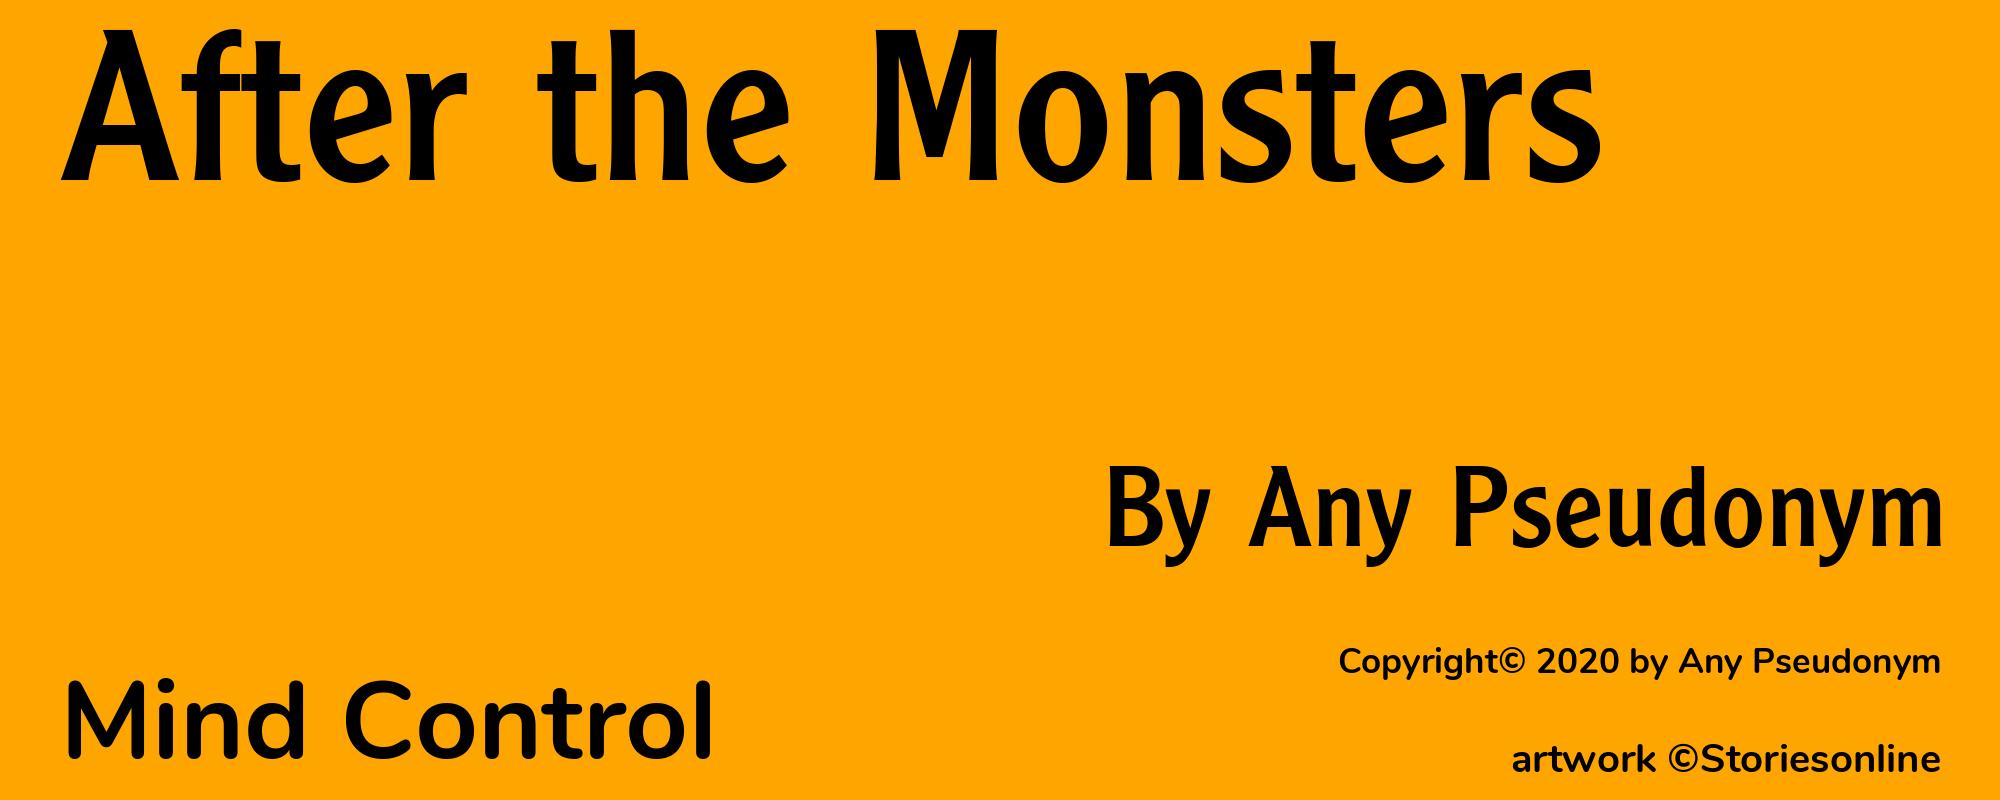 After the Monsters - Cover